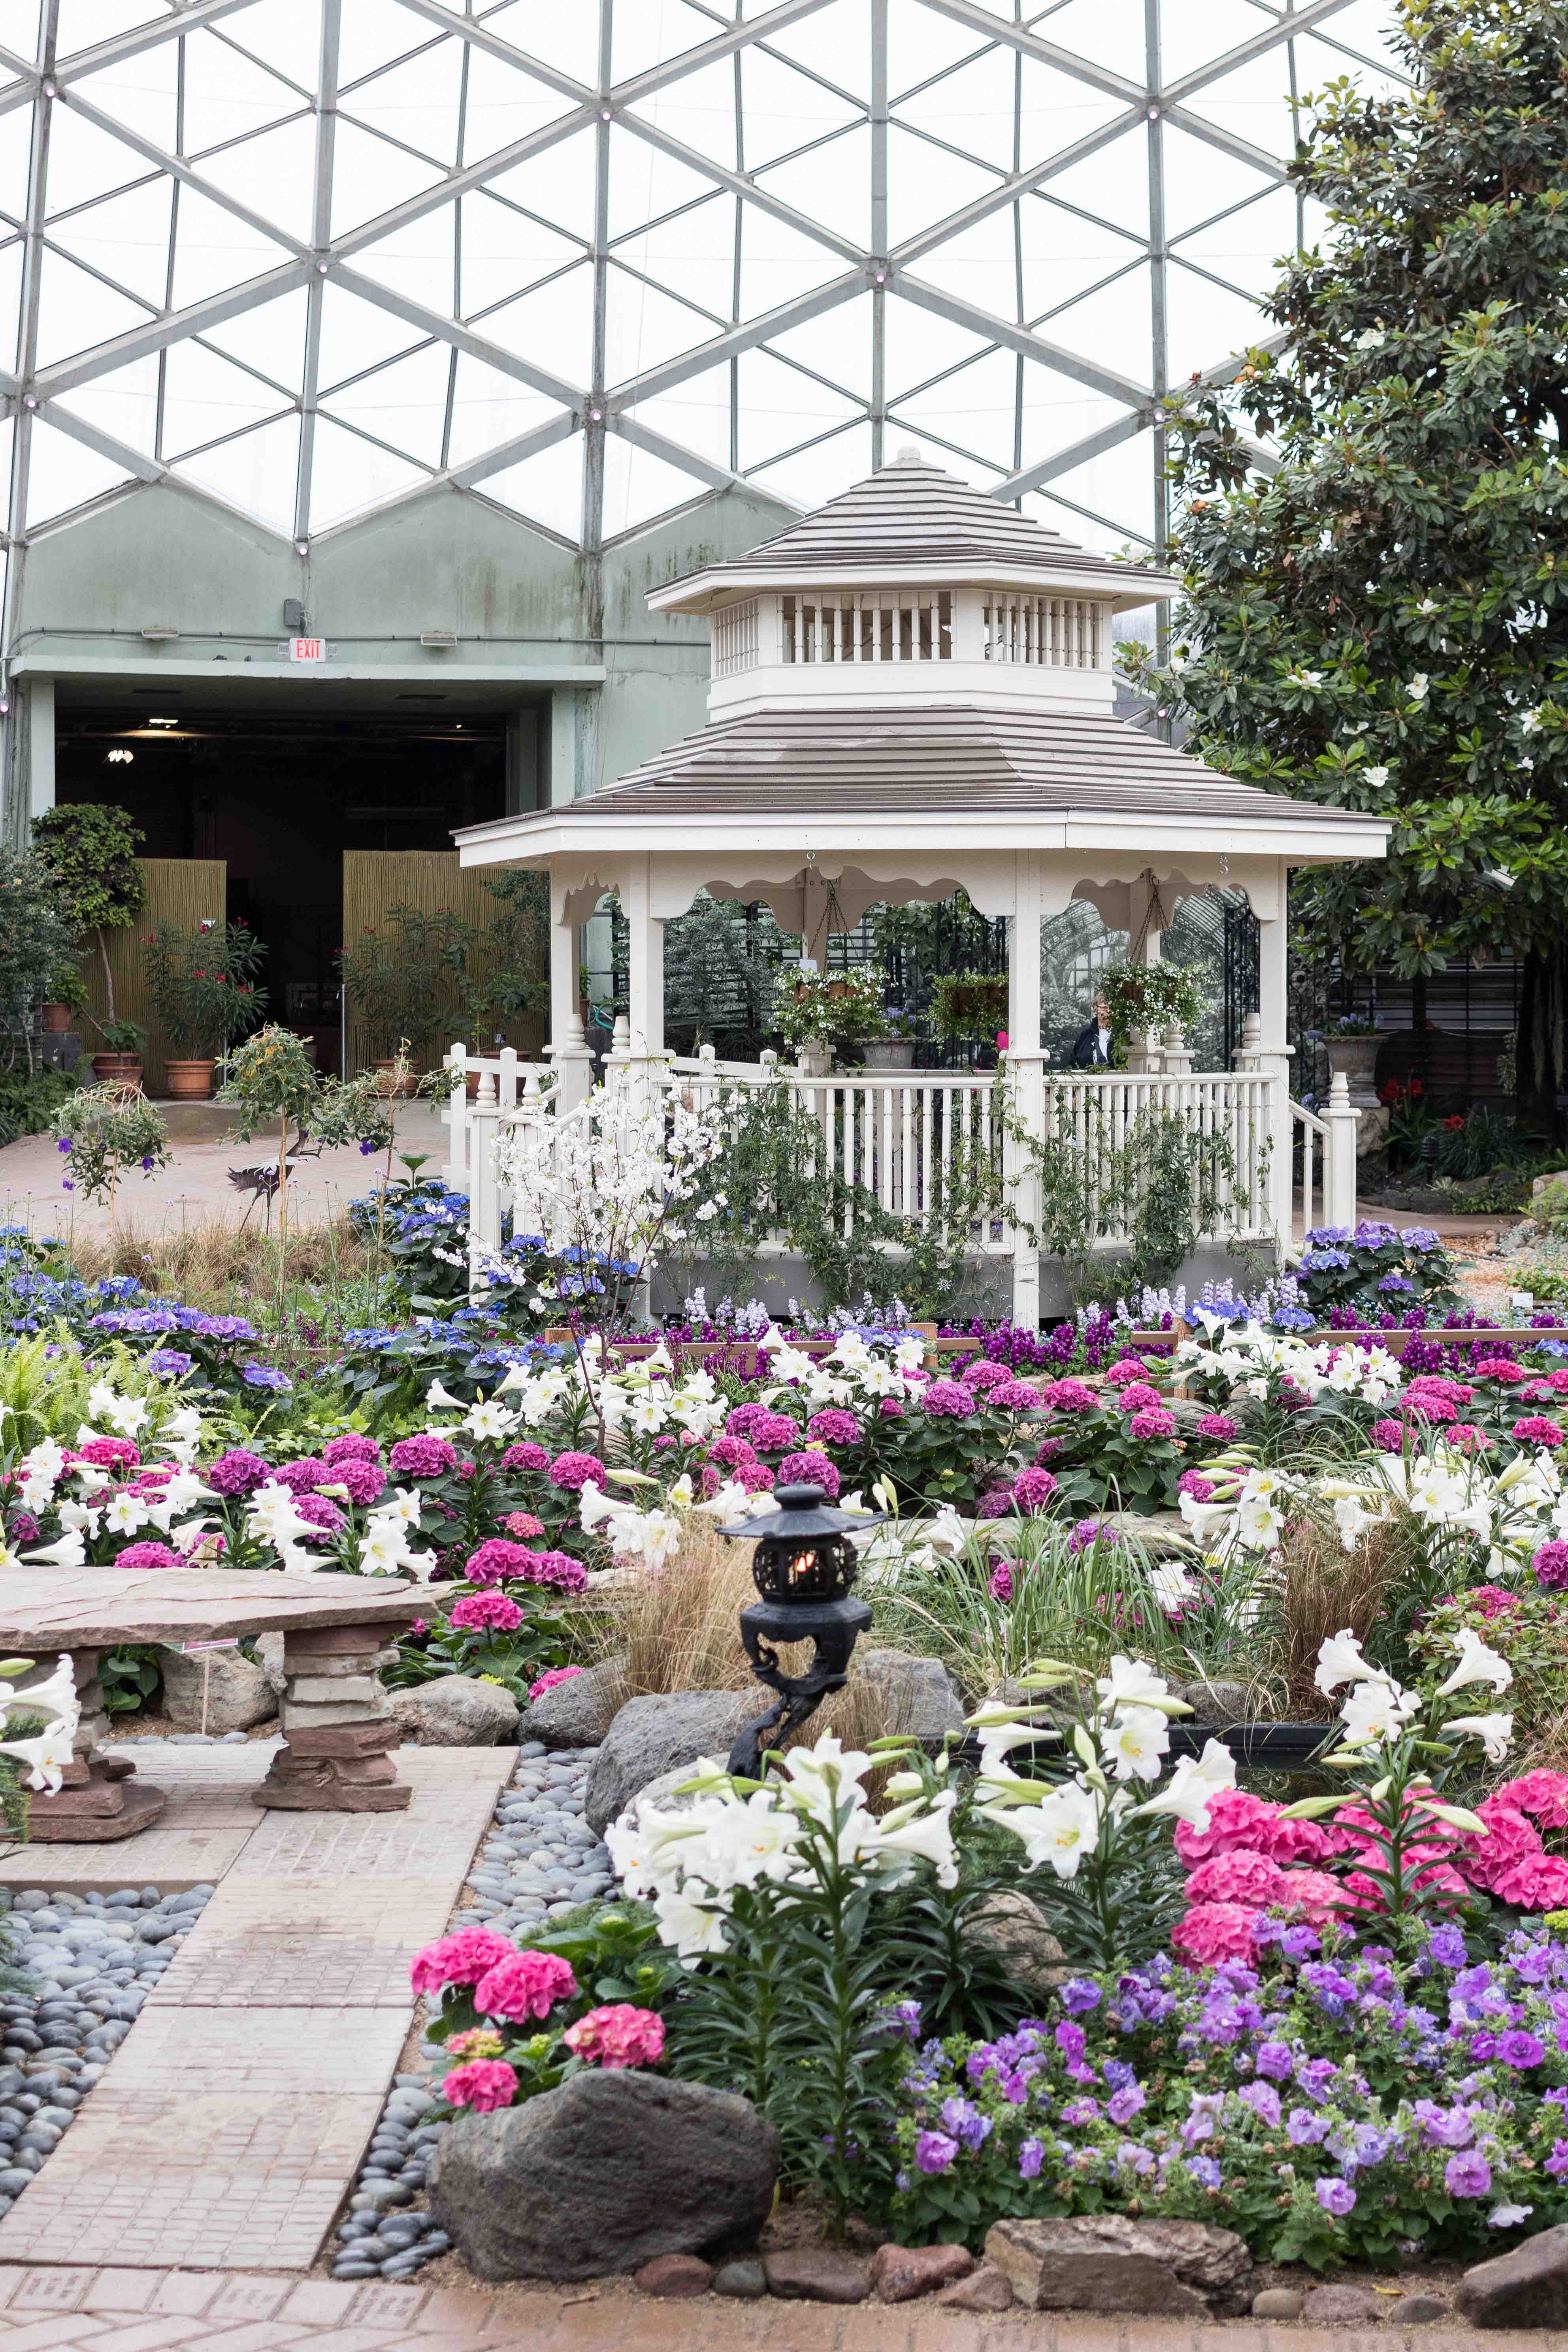 Japanese Zen Garden Spring Floral Show at the Mitchell Park Domes in Milwaukee, WI #Japanesezengarden #floralshow #MitchellParkDomes | https://www.roseclearfield.com